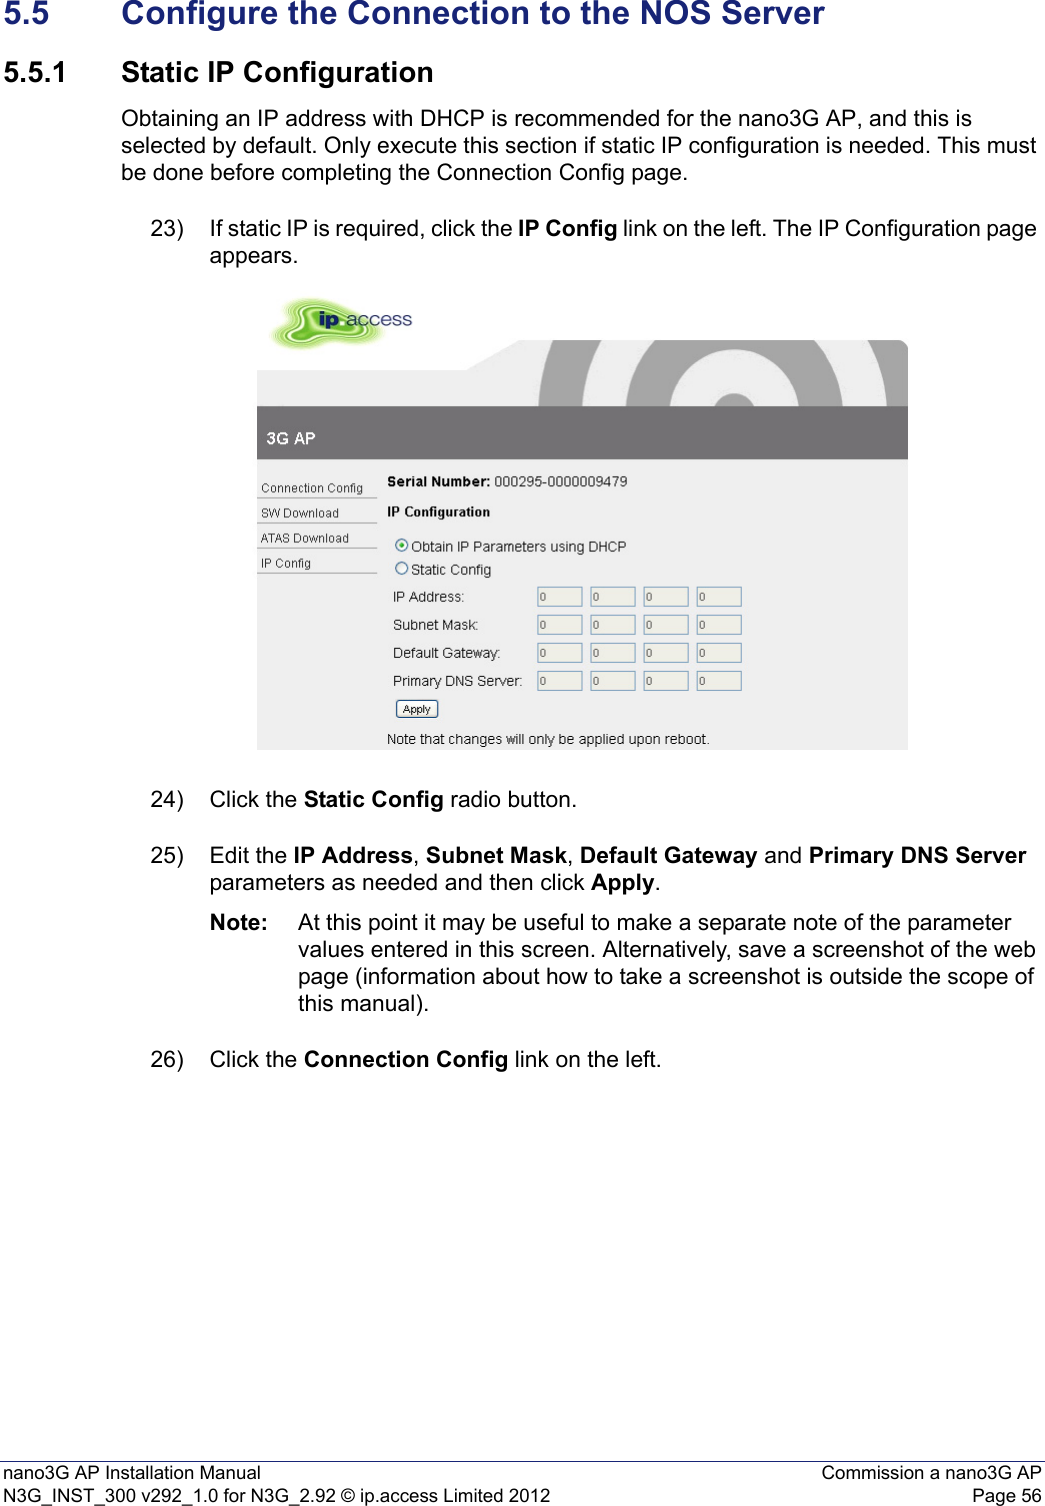 nano3G AP Installation Manual Commission a nano3G APN3G_INST_300 v292_1.0 for N3G_2.92 © ip.access Limited 2012 Page 565.5 Configure the Connection to the NOS Server5.5.1 Static IP ConfigurationObtaining an IP address with DHCP is recommended for the nano3G AP, and this is selected by default. Only execute this section if static IP configuration is needed. This must be done before completing the Connection Config page.23) If static IP is required, click the IP Config link on the left. The IP Configuration page appears.24) Click the Static Config radio button.25) Edit the IP Address, Subnet Mask, Default Gateway and Primary DNS Server parameters as needed and then click Apply.Note: At this point it may be useful to make a separate note of the parameter values entered in this screen. Alternatively, save a screenshot of the web page (information about how to take a screenshot is outside the scope of this manual).26) Click the Connection Config link on the left.